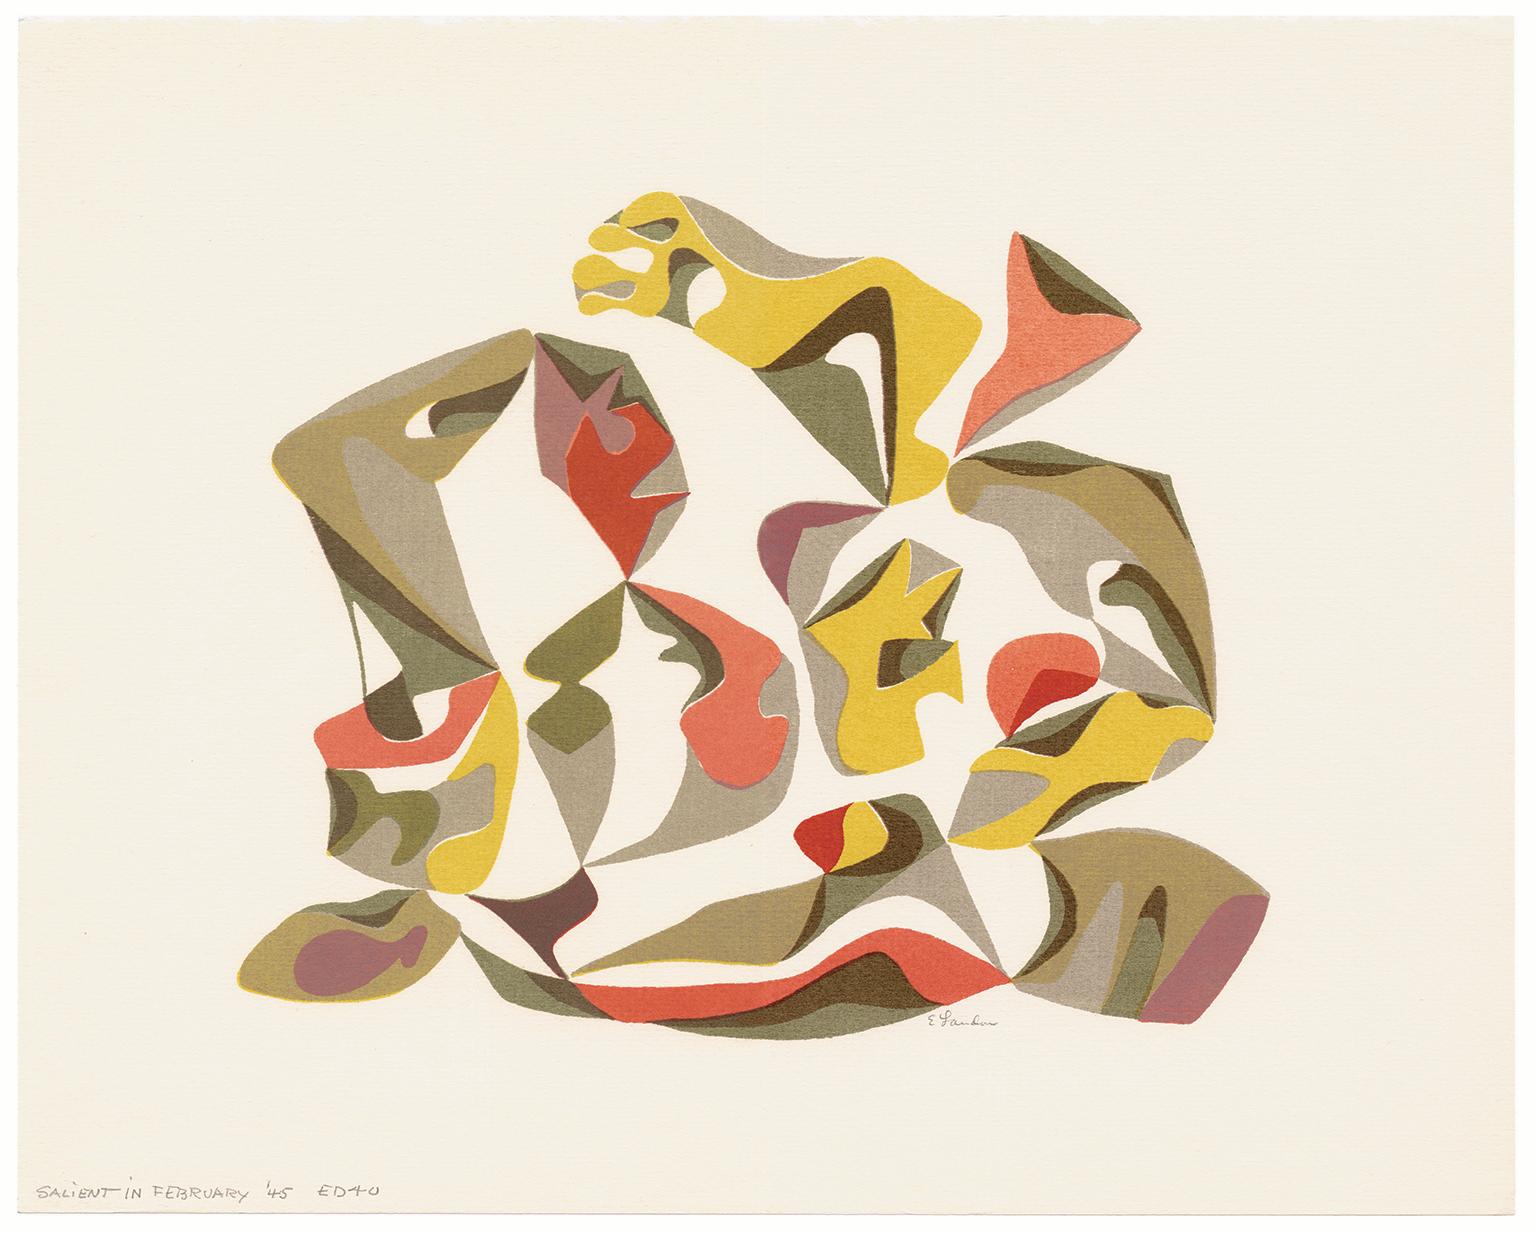 'Salient in February' — Mid-Century Abstraction - Print by Edward August Landon